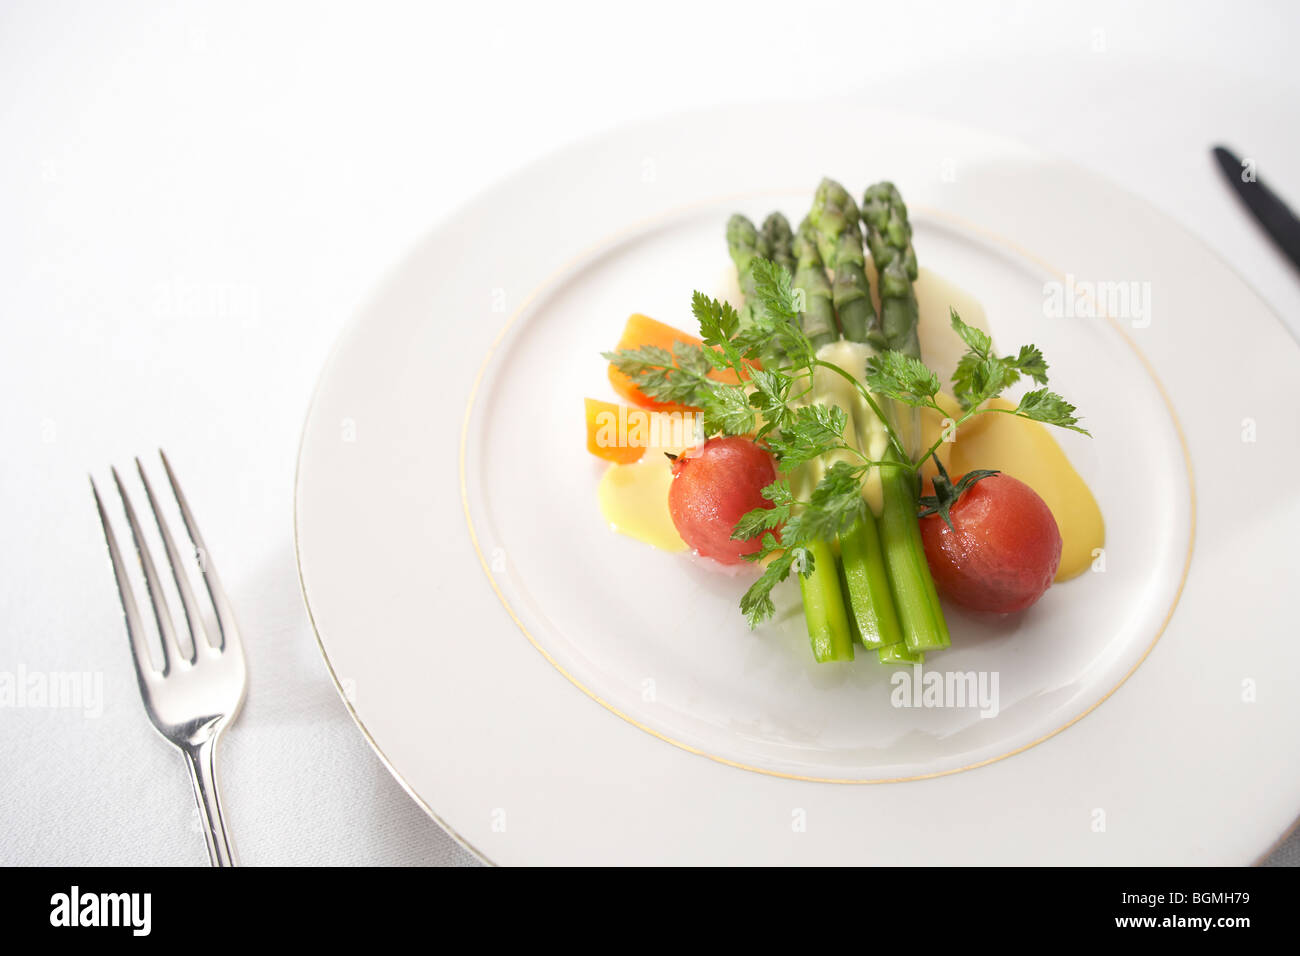 Variety of vegetables with hollandaise sauce Stock Photo